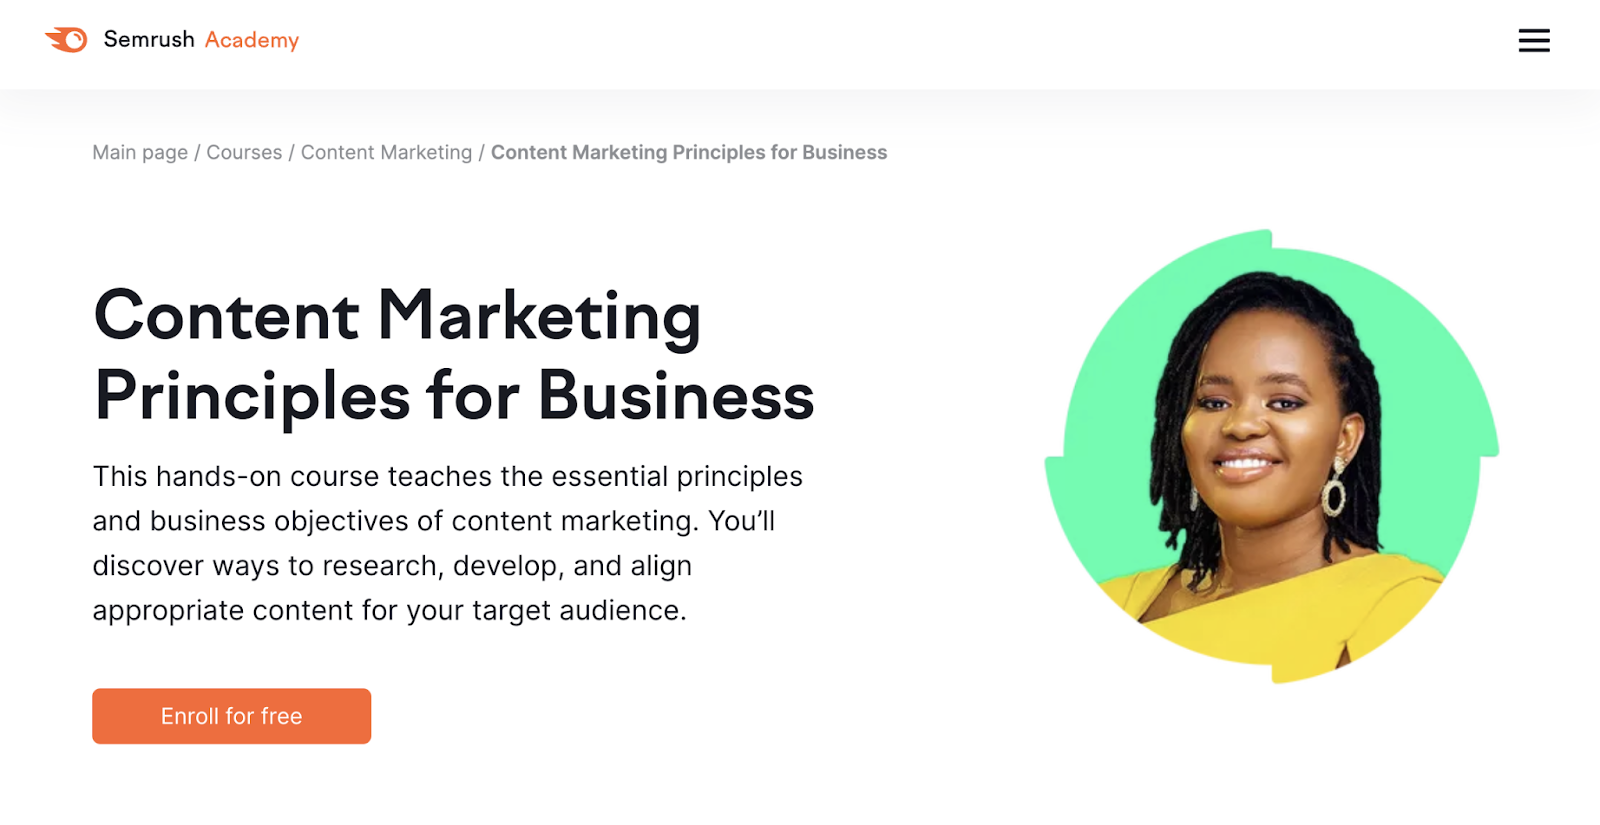 Content Marketing Principles for Business course